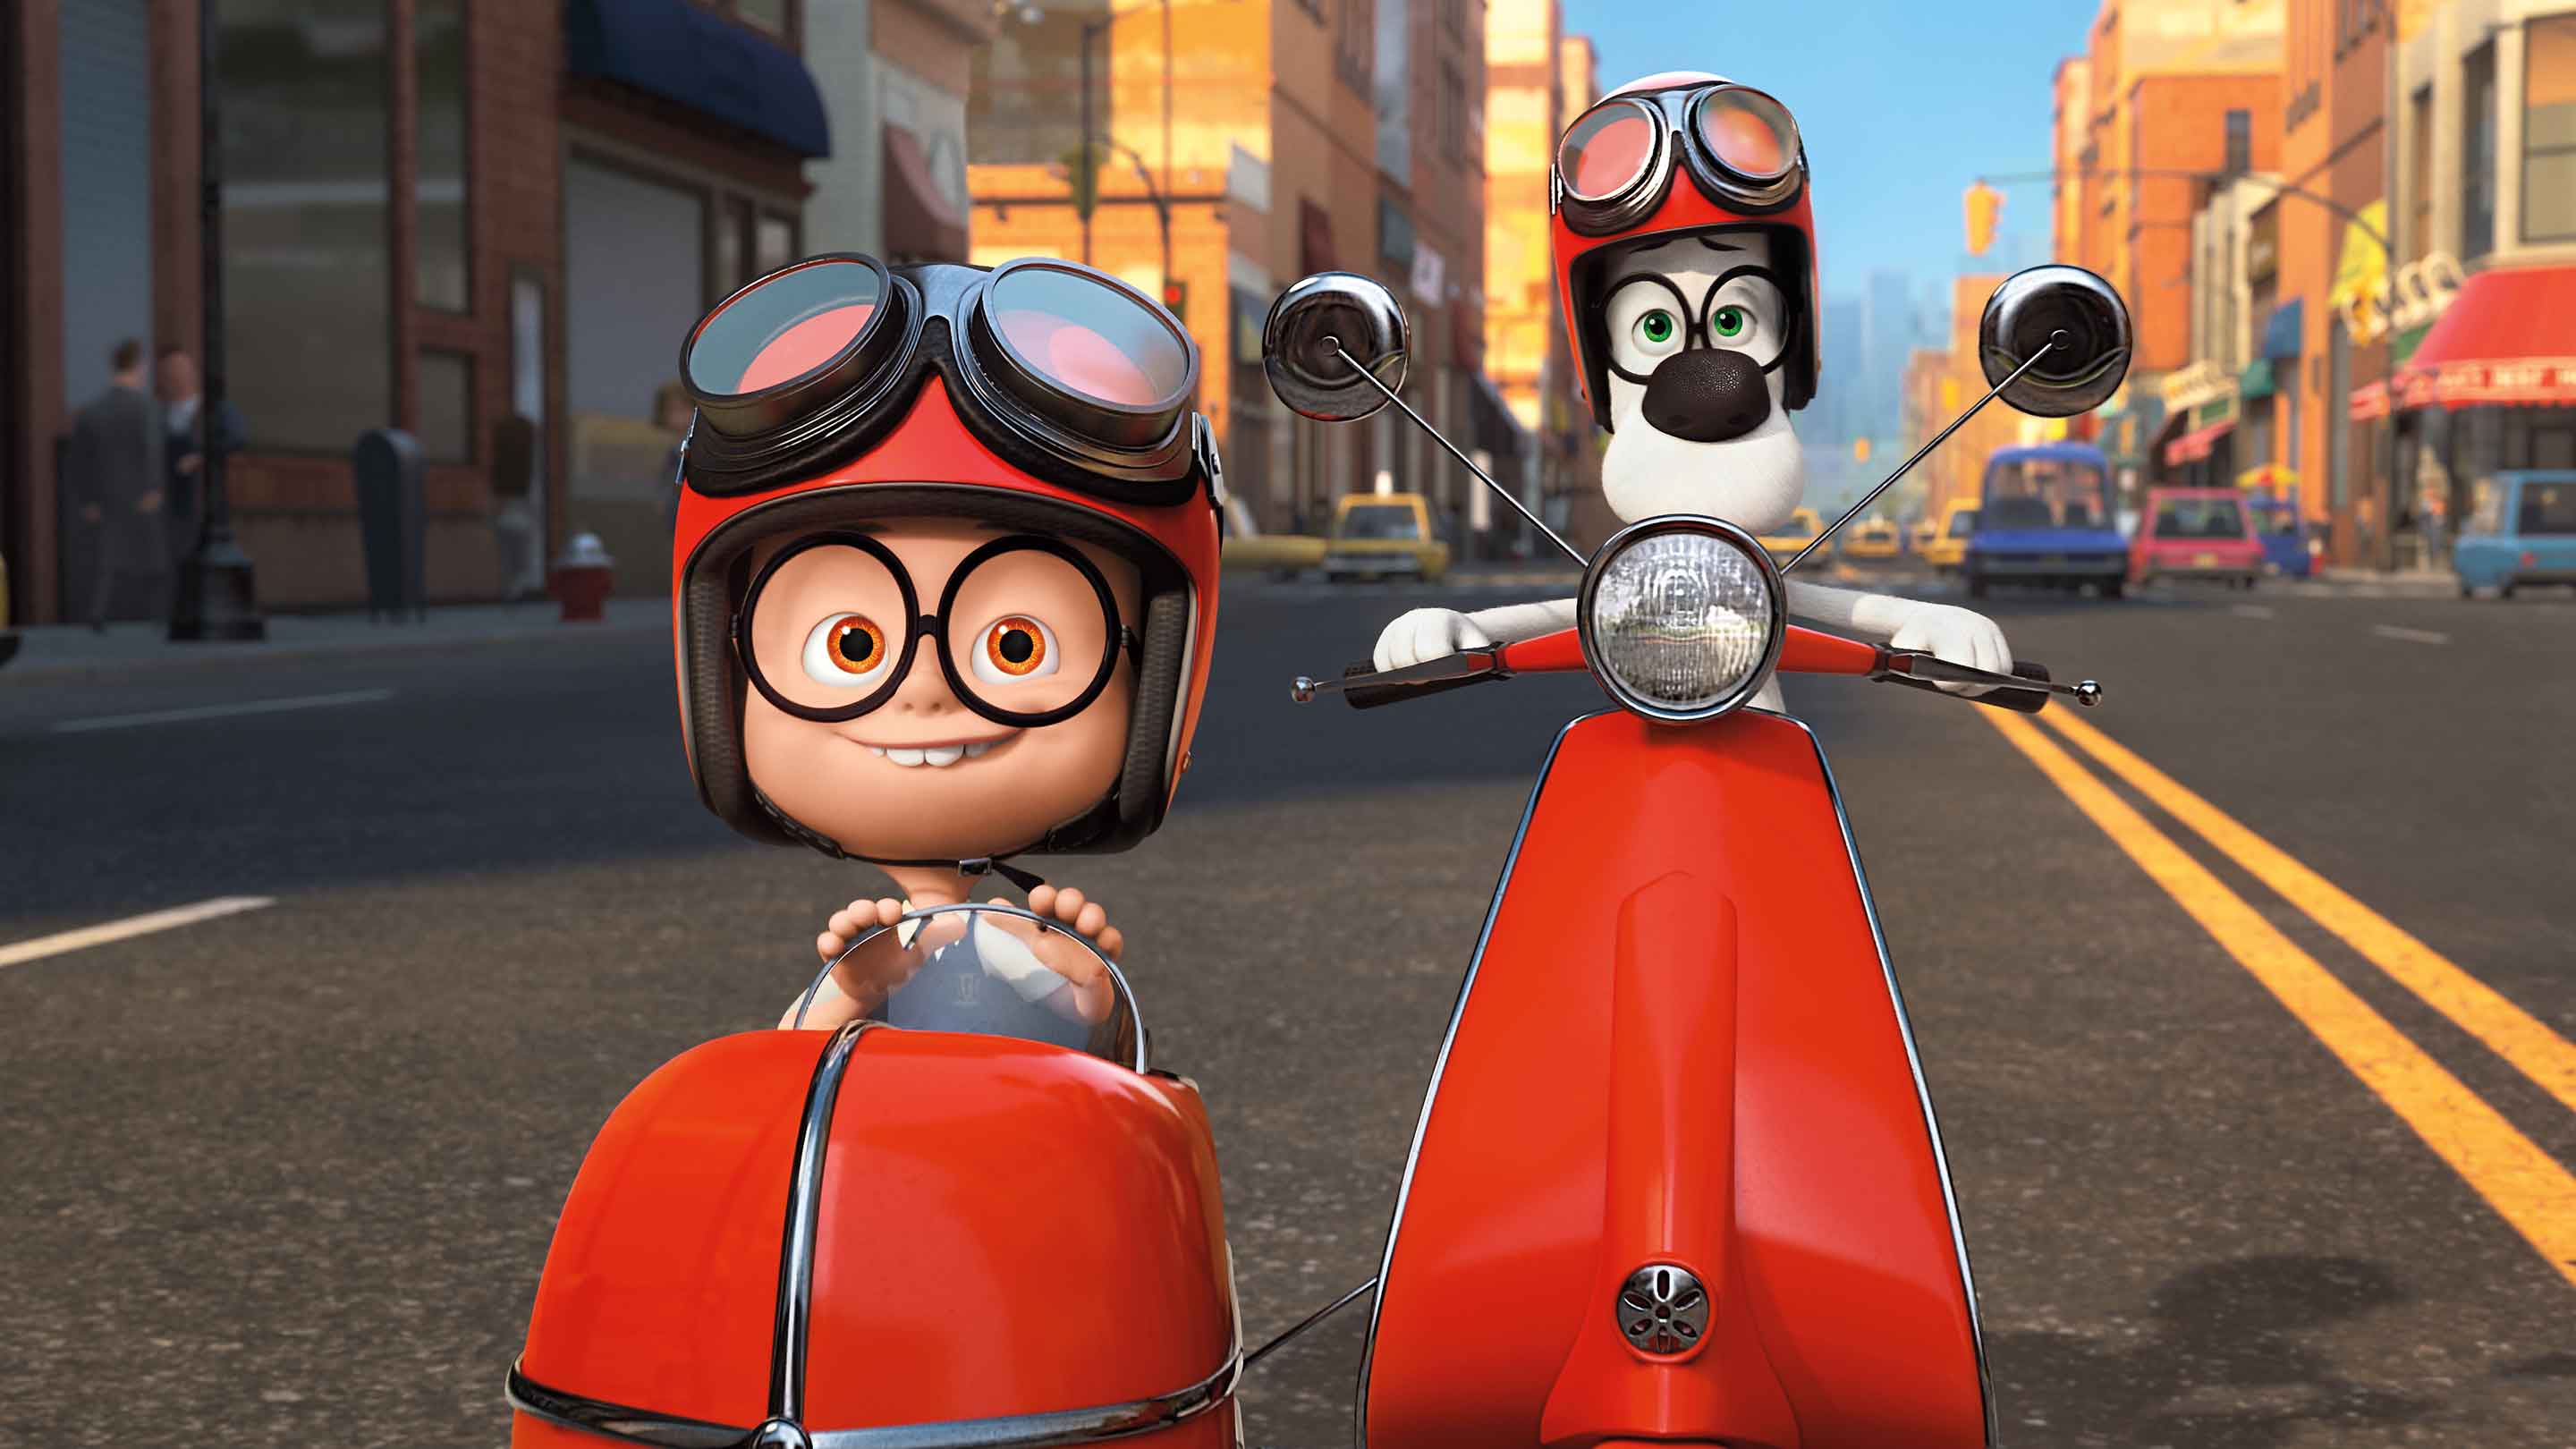 Best family movies on Netflix - mr. peabody and sherman